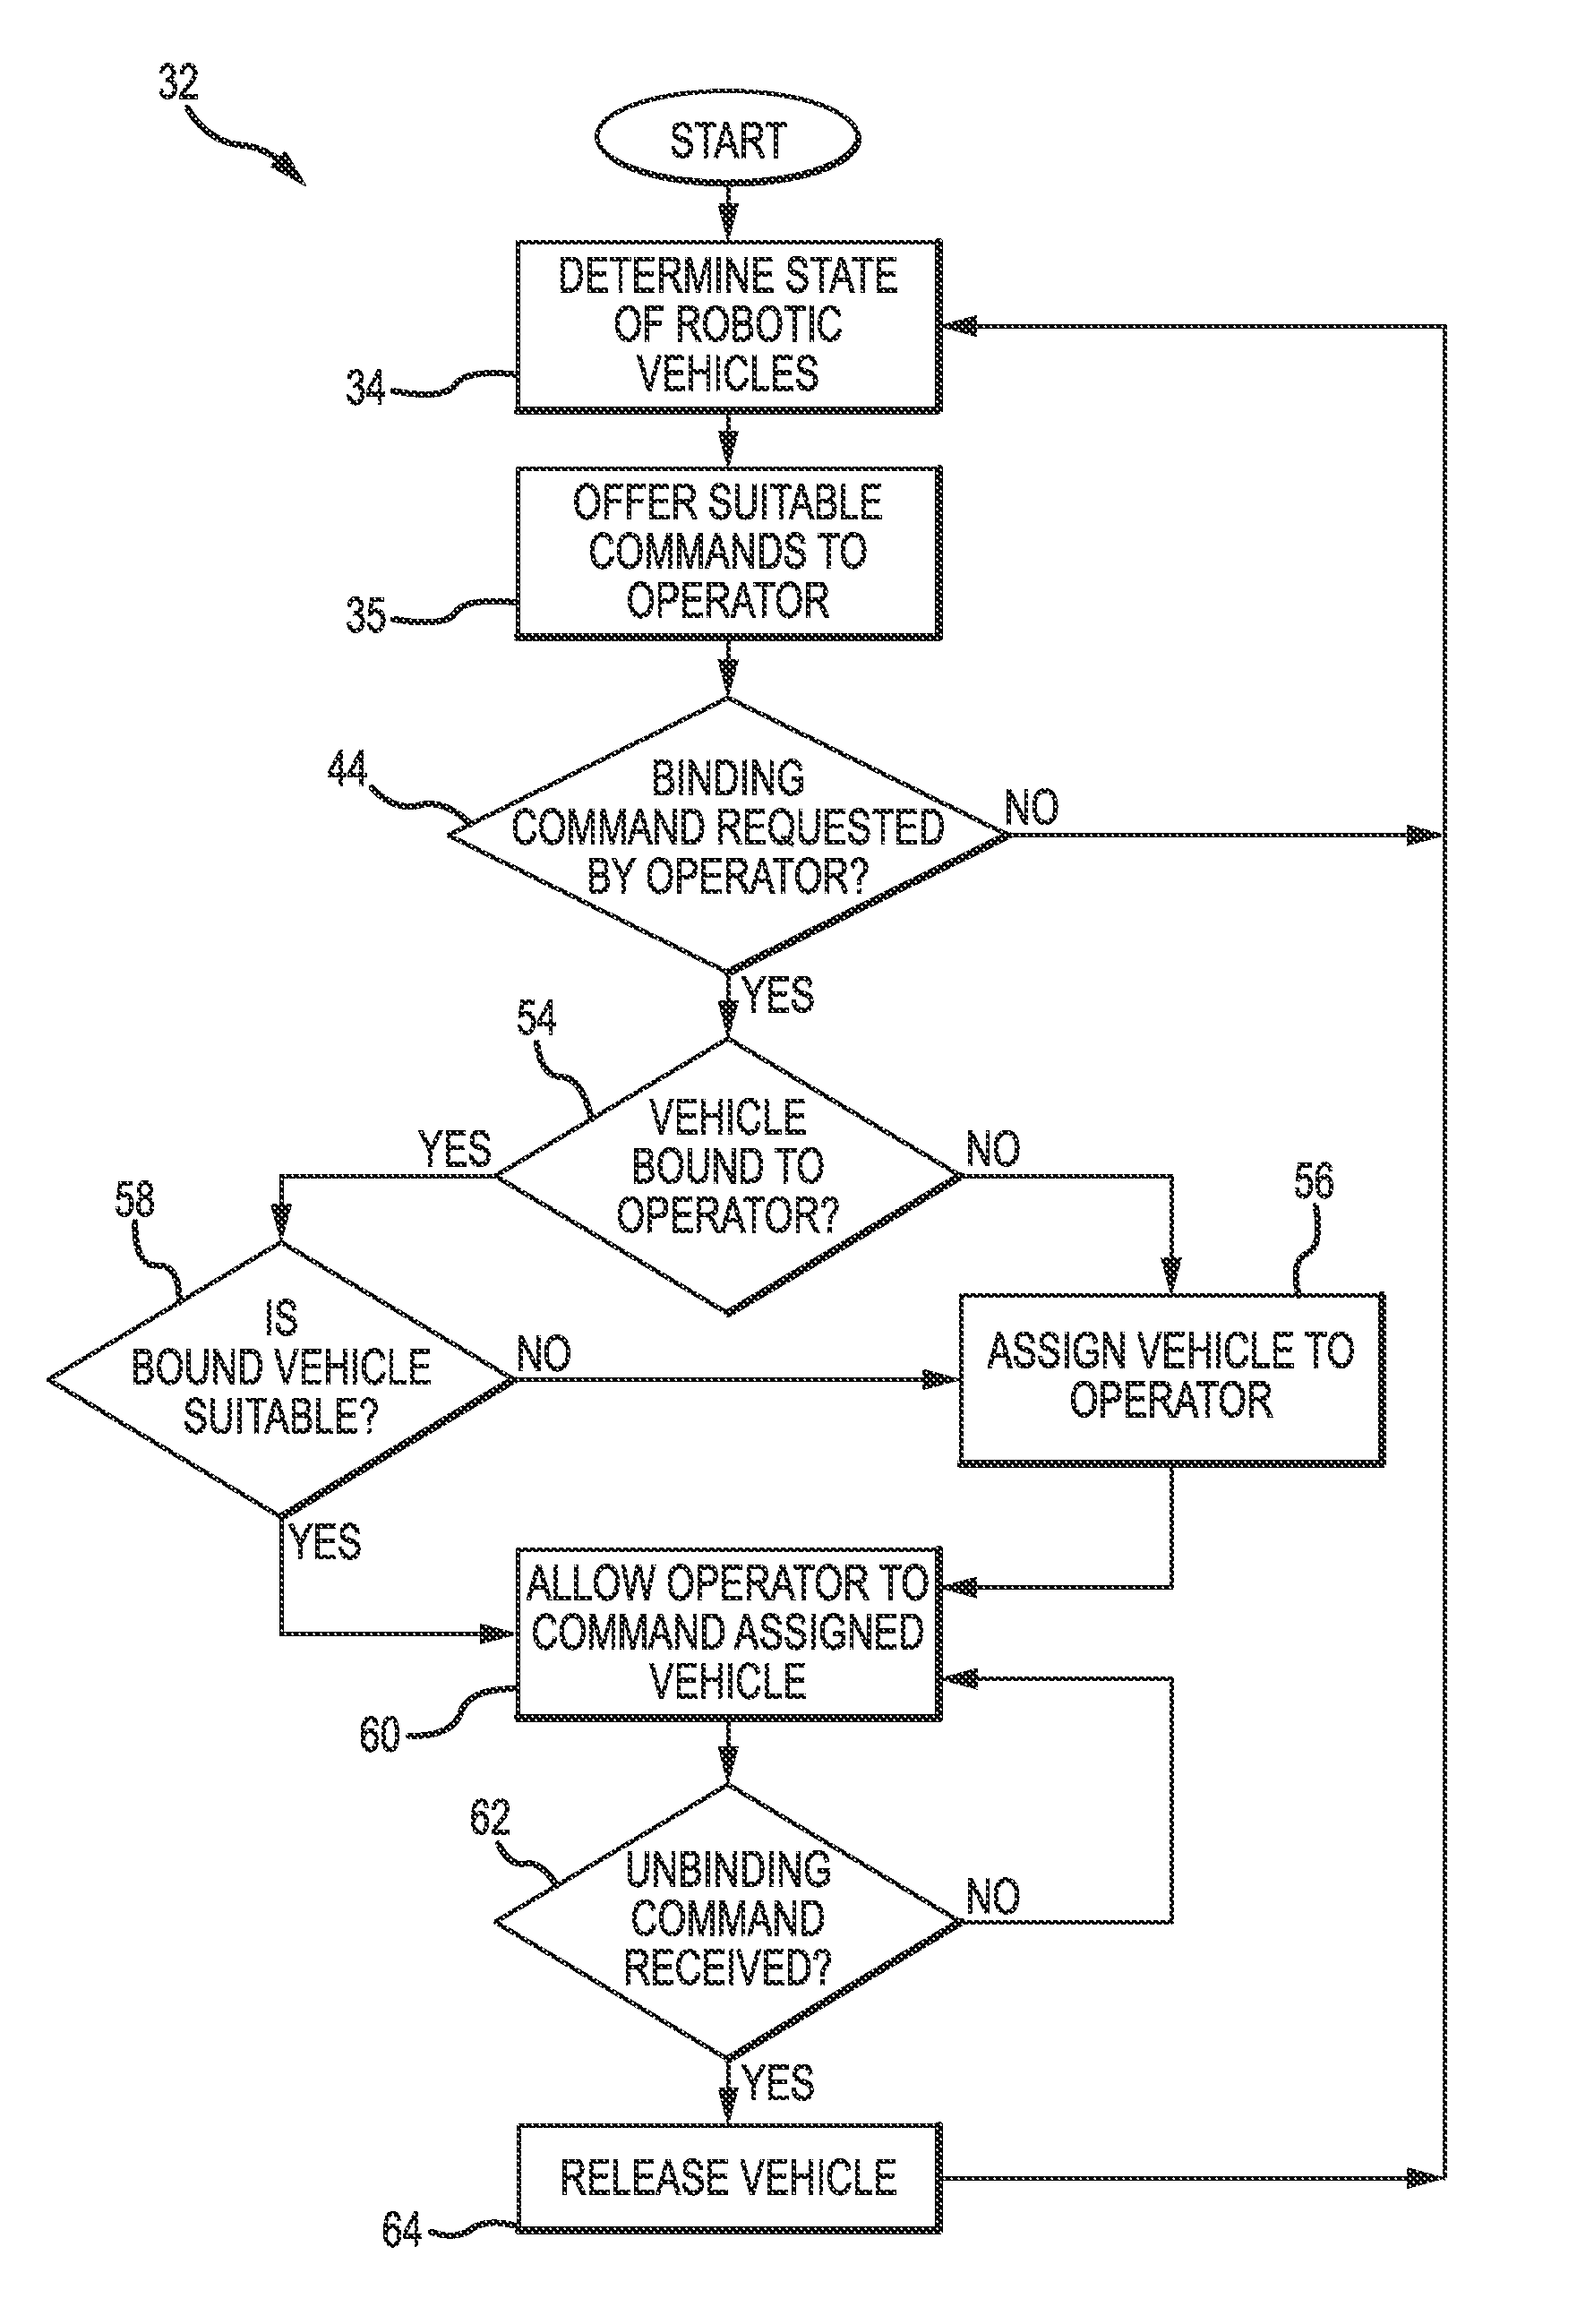 Multi-operator, multi-robot control system with automatic vehicle selection